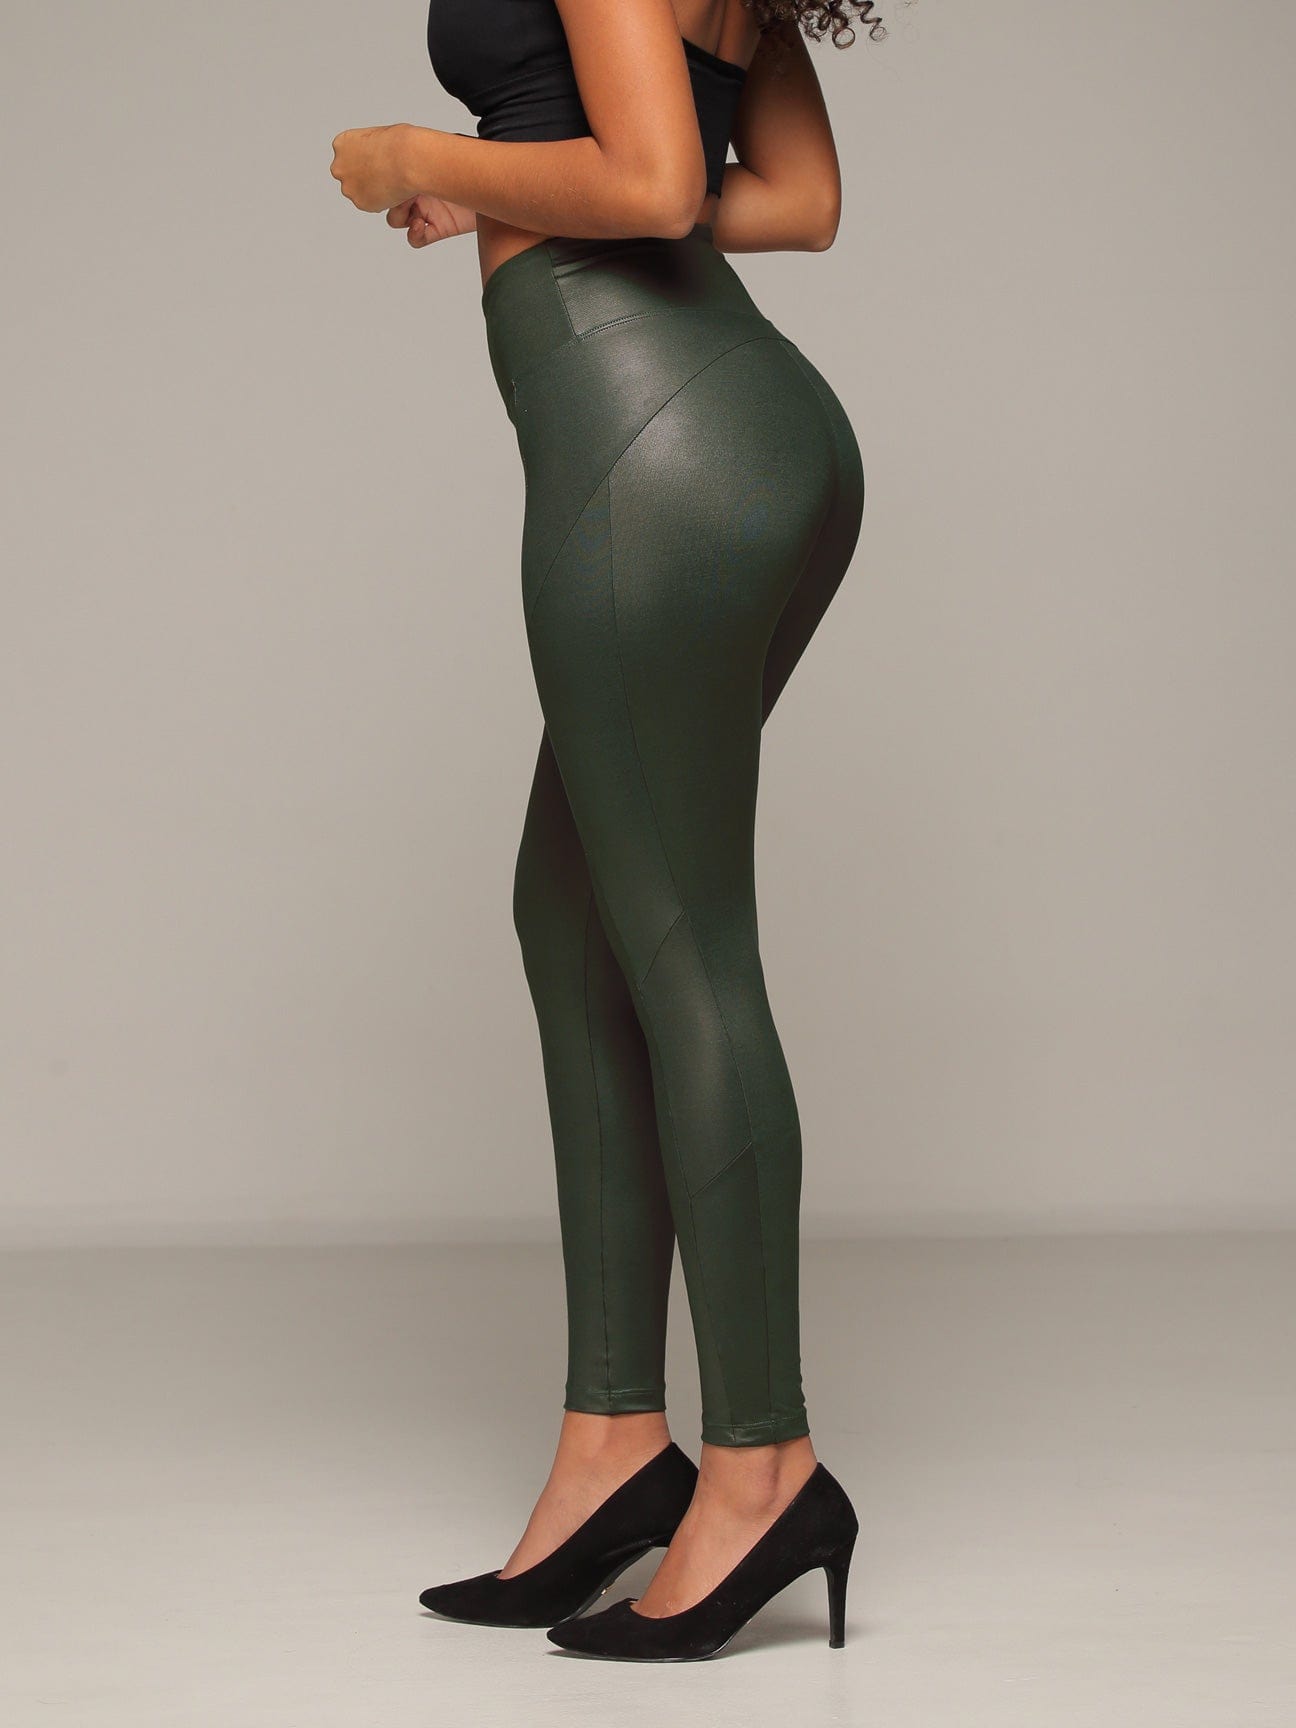 Forest Butt Lift Olive Leggings with Tummy Control lower side view.